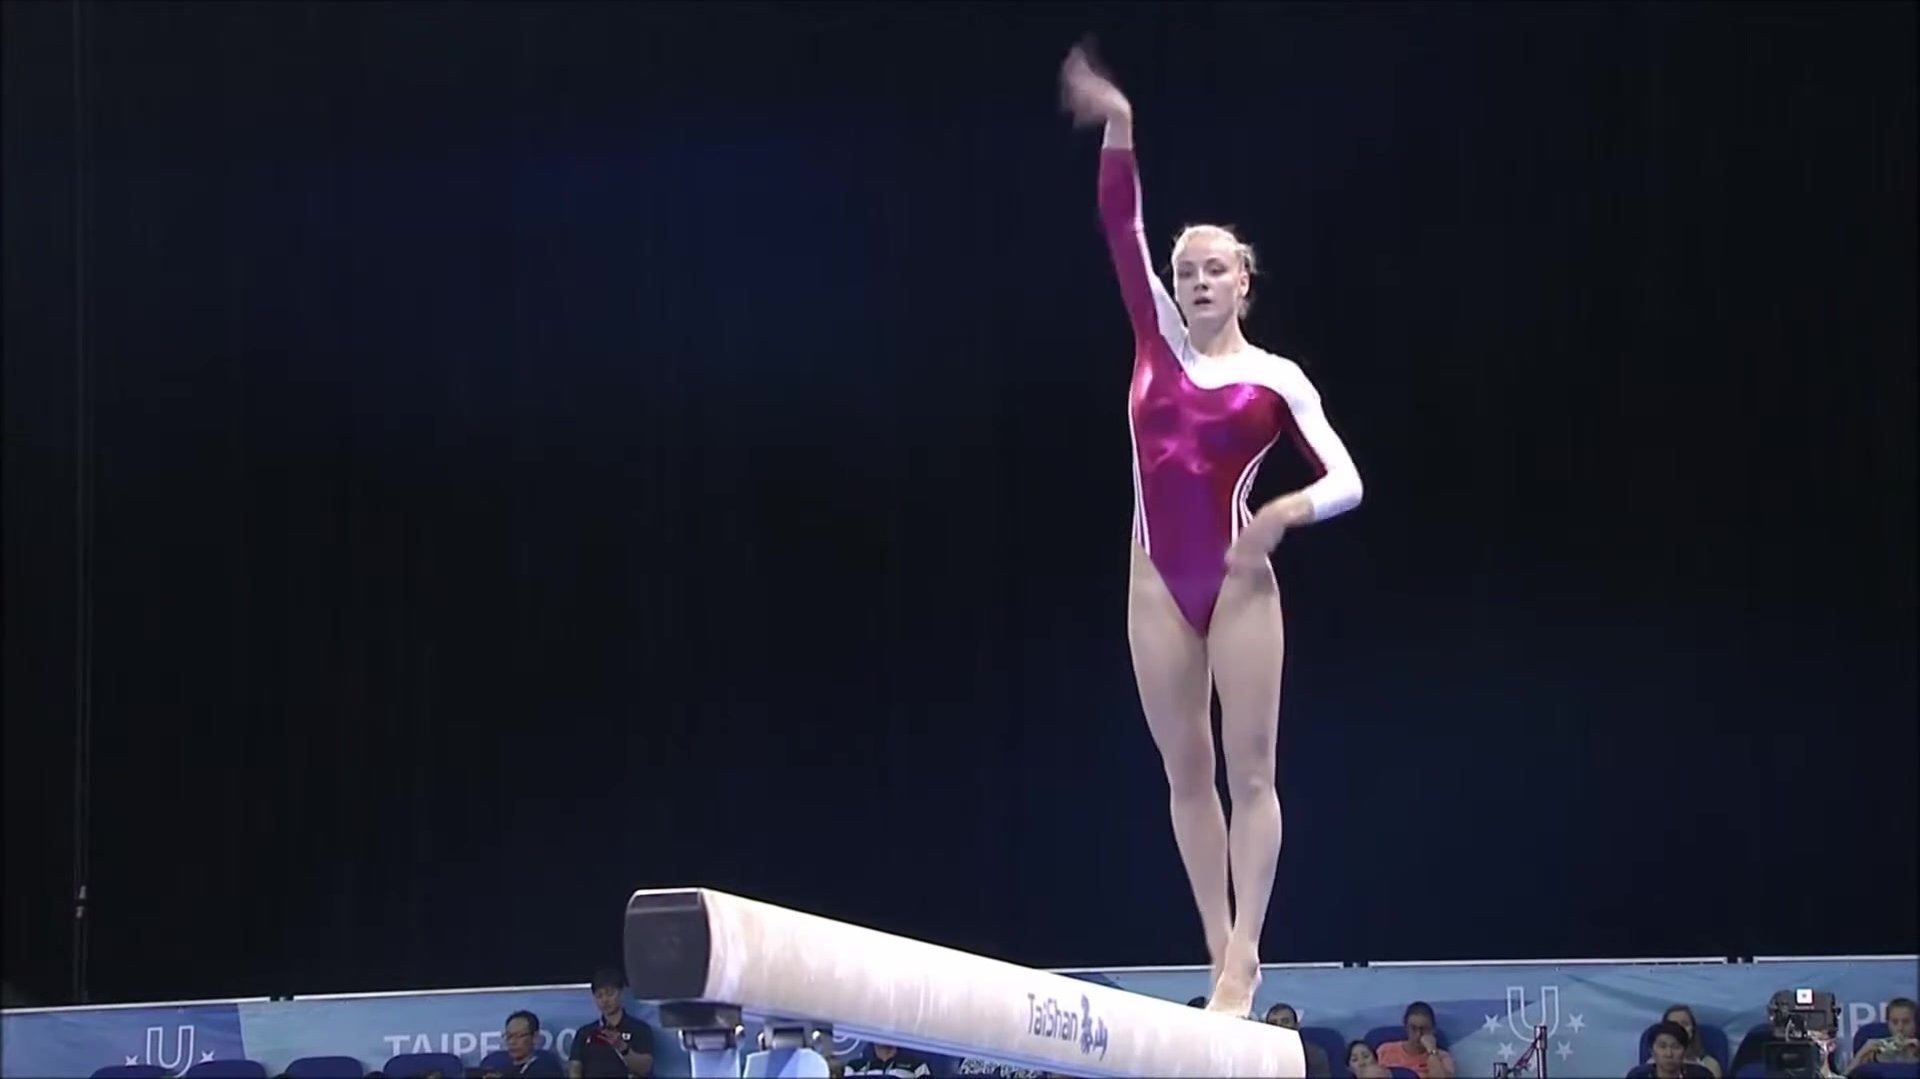 Very tight and high-cut leotard